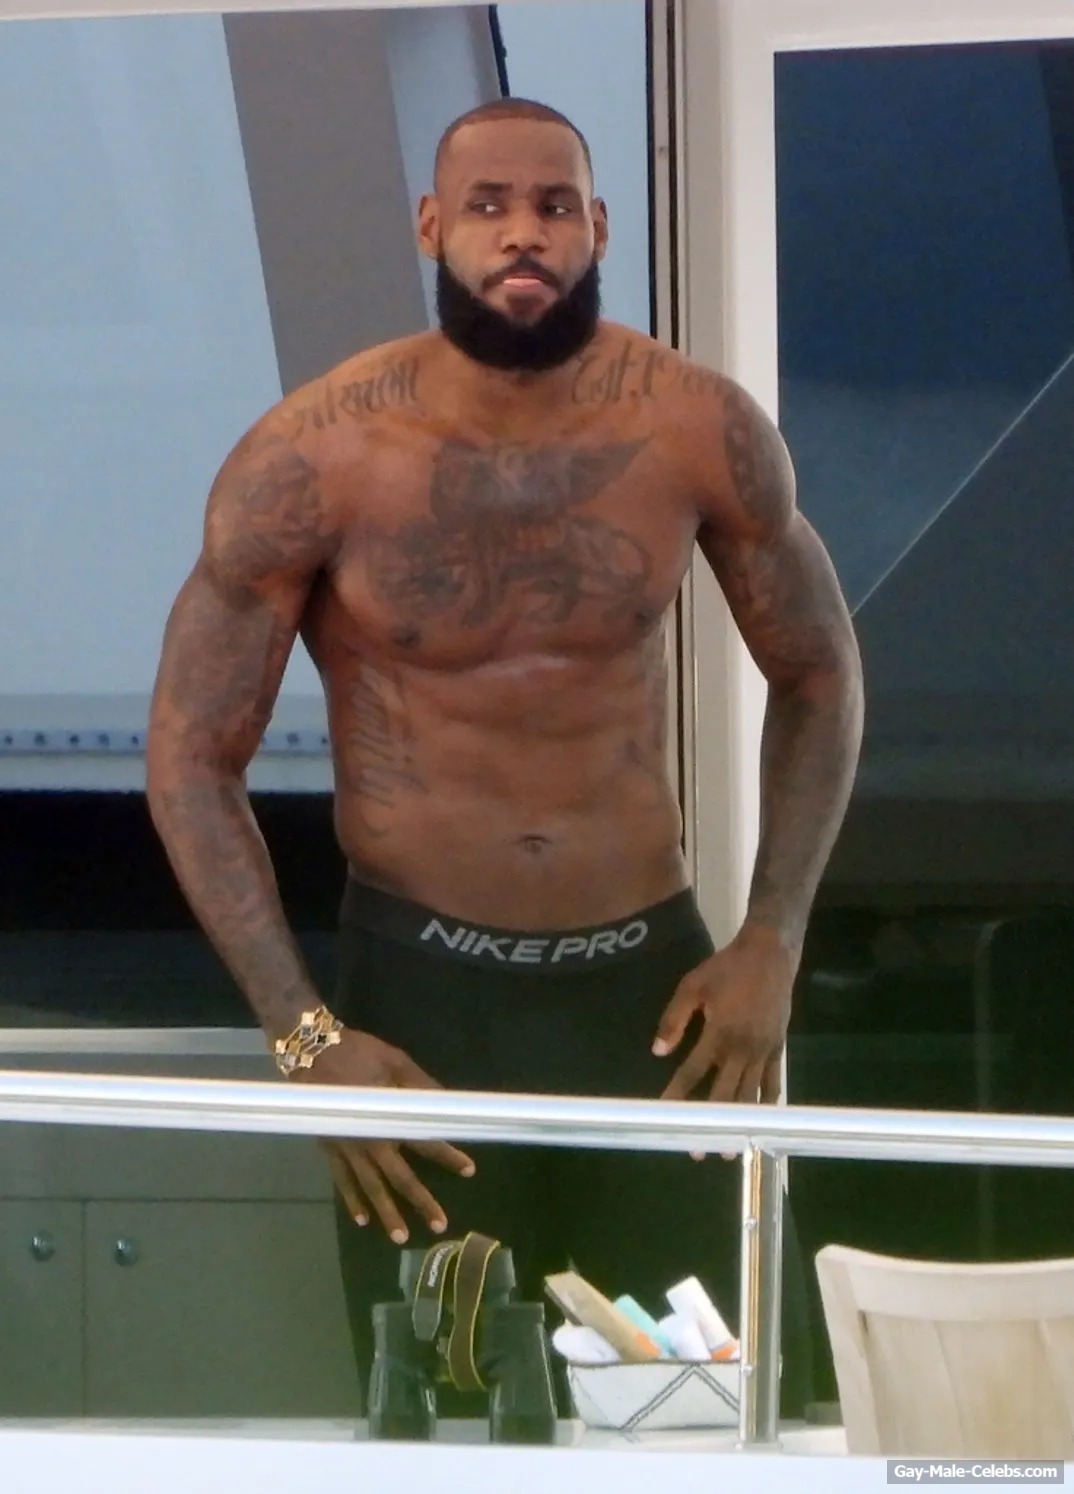 Lebron James Shows His Muscle Body During Workout